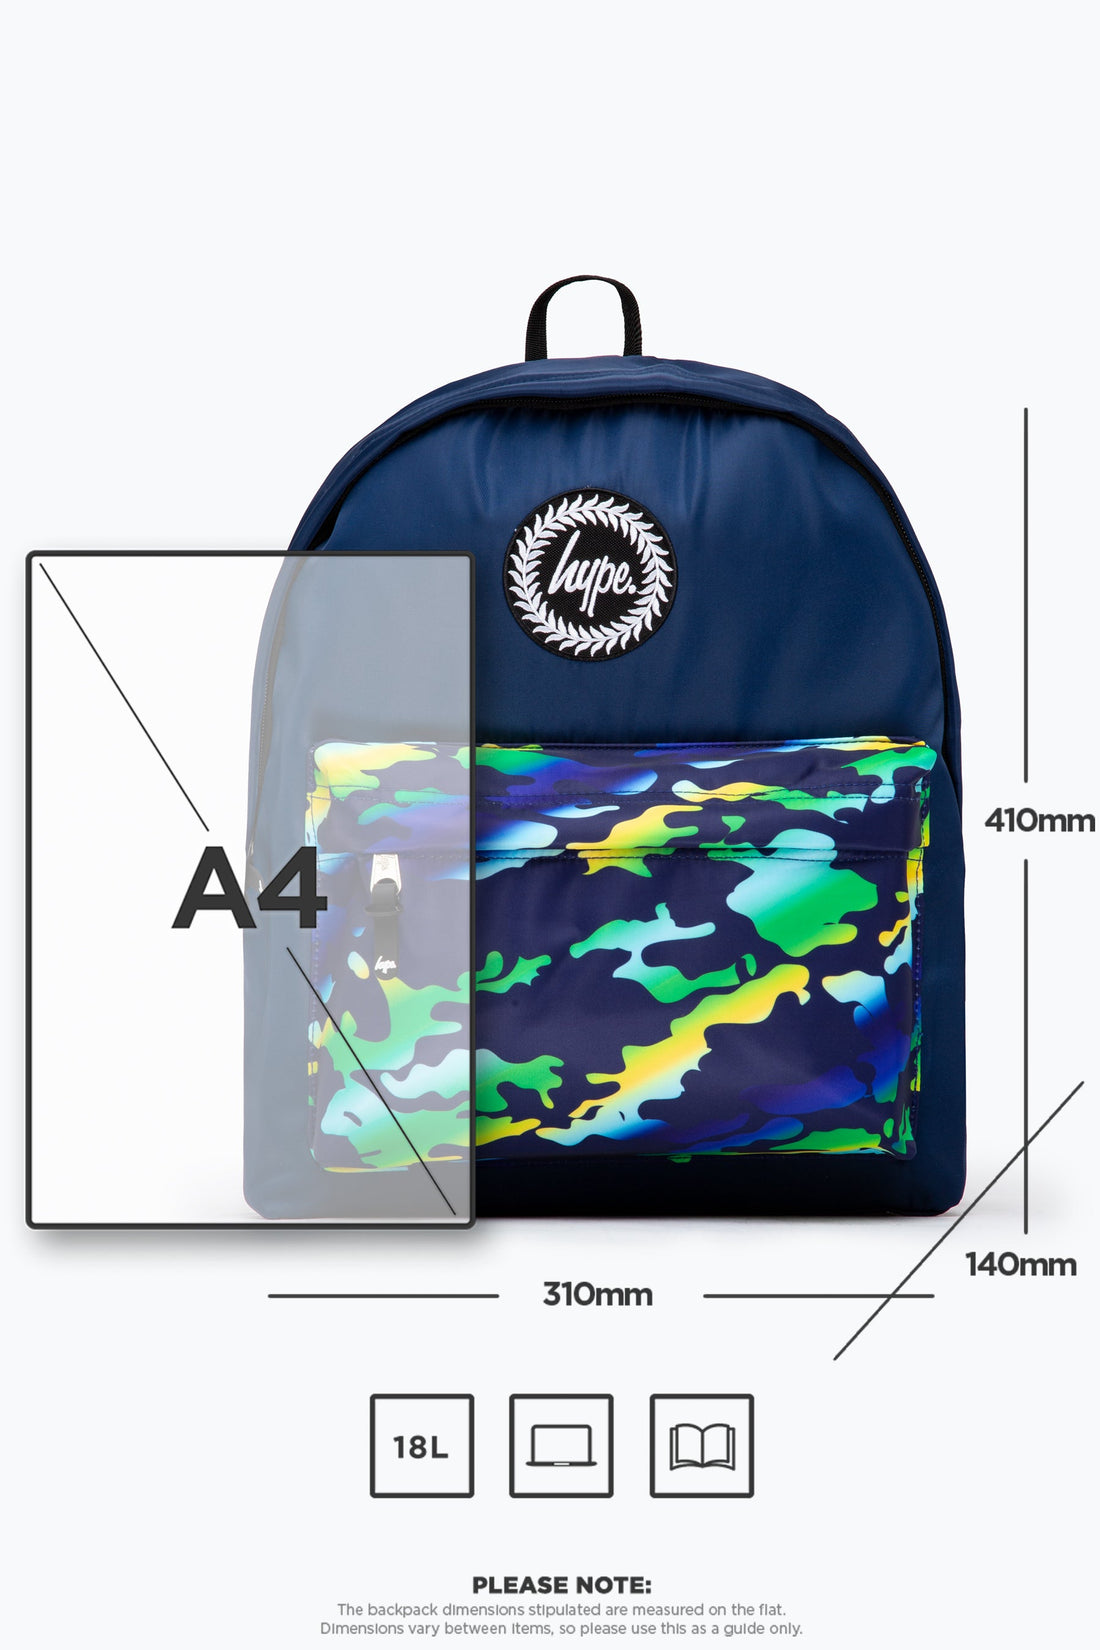 NAVY WITH CAMO GRADIENTS BACKPACK